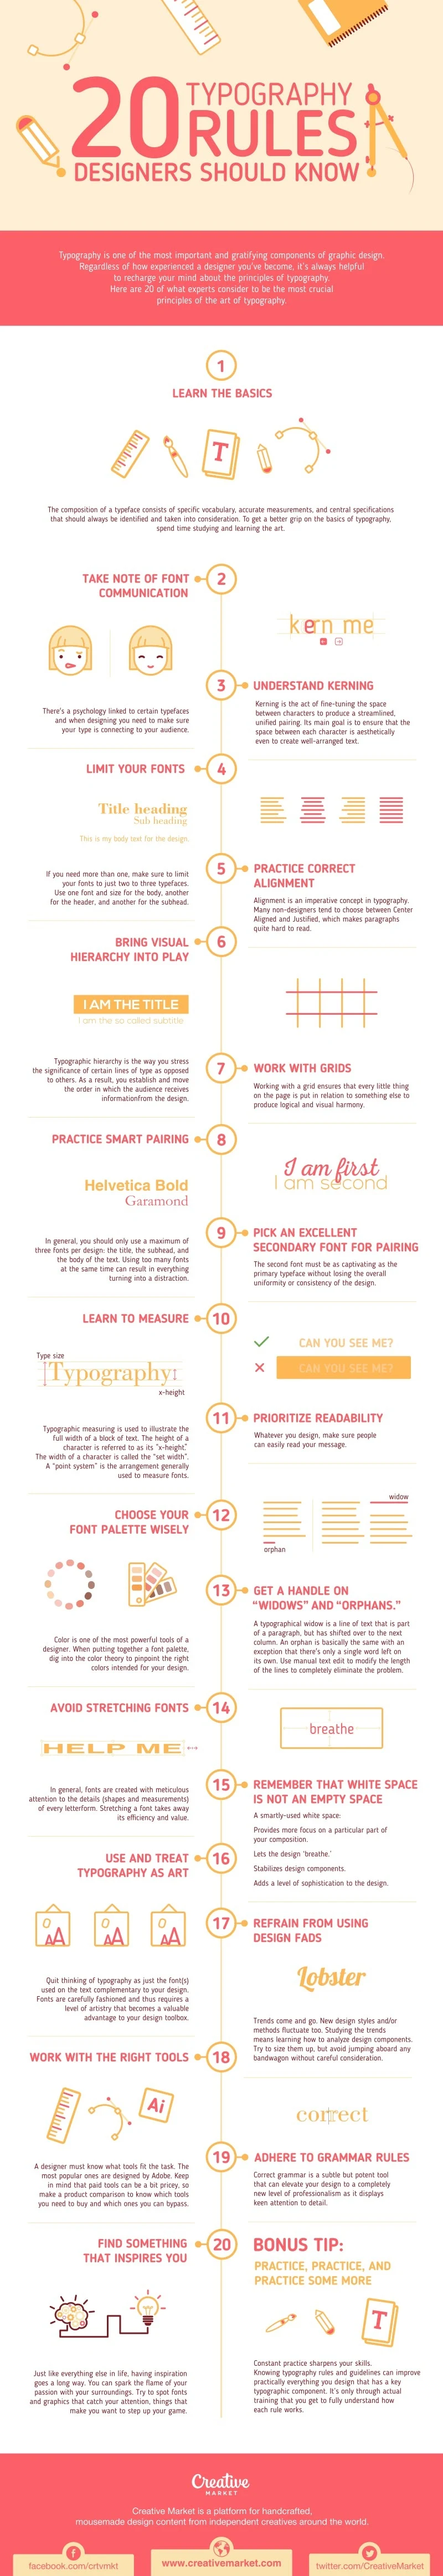 20 Typography Rules Every Designer Should Know - #infographic